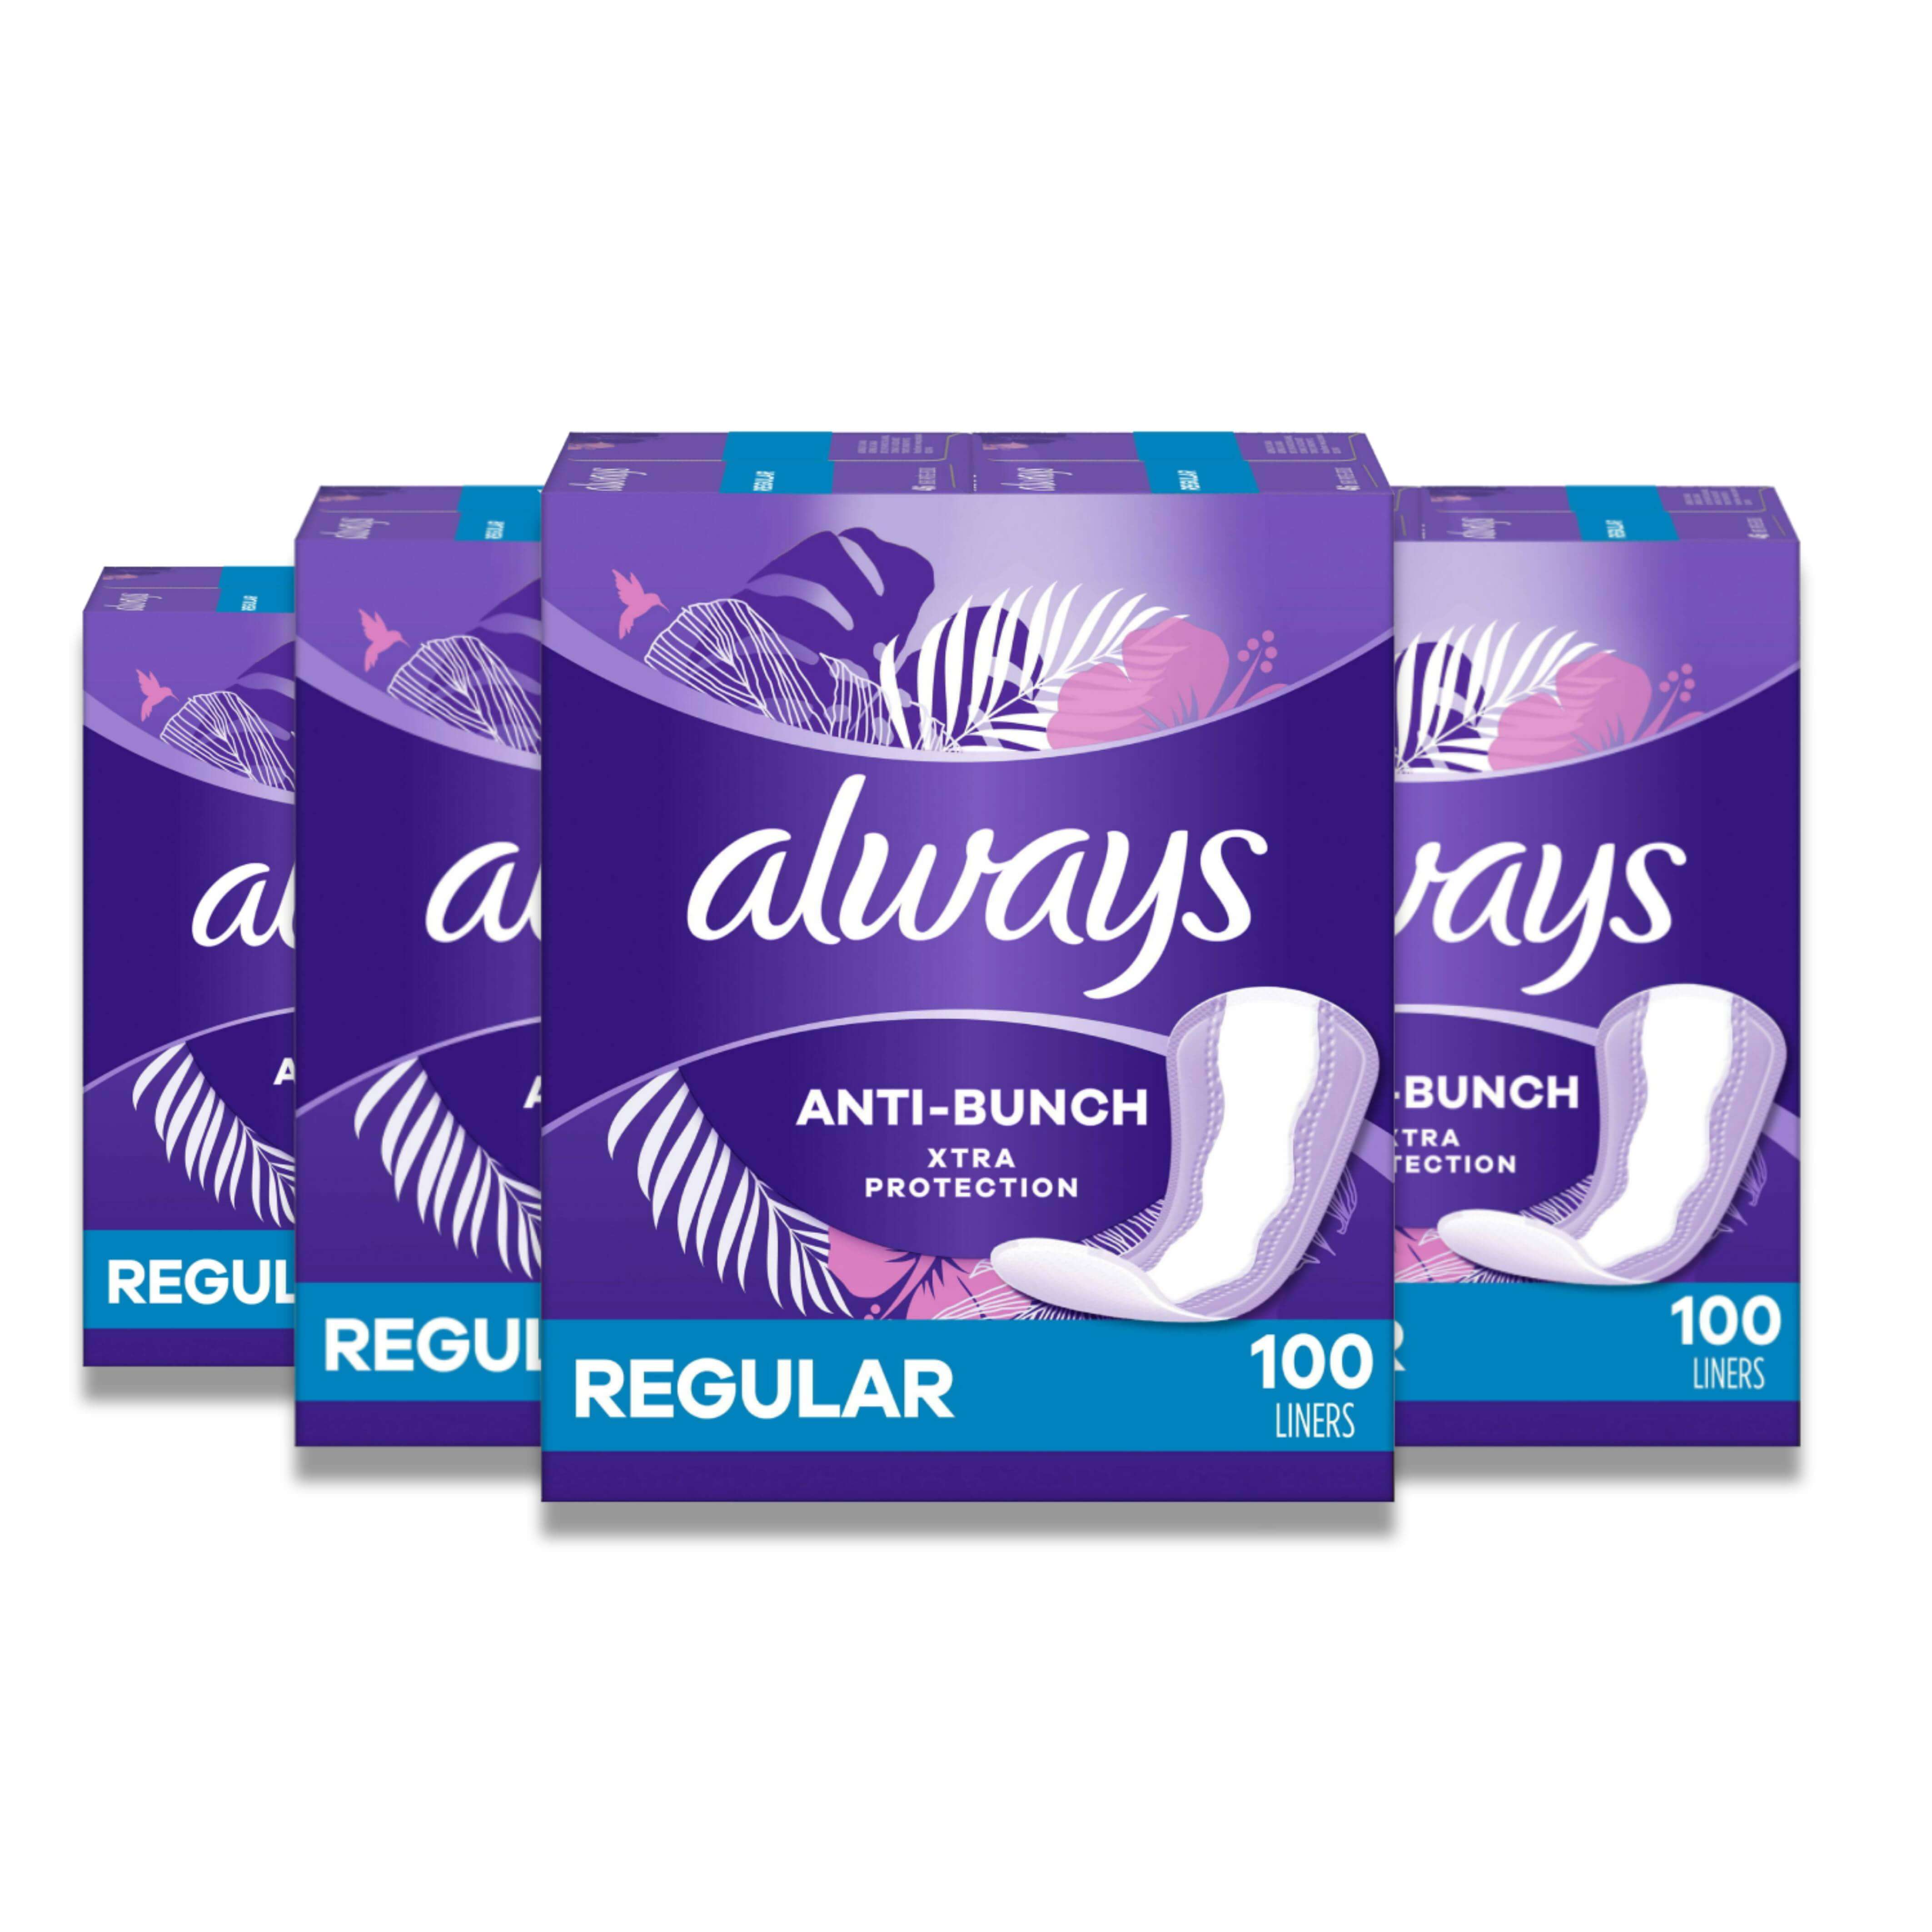 Always Anti-Bunch Xtra Protection Daily Liners Long, 200 Count